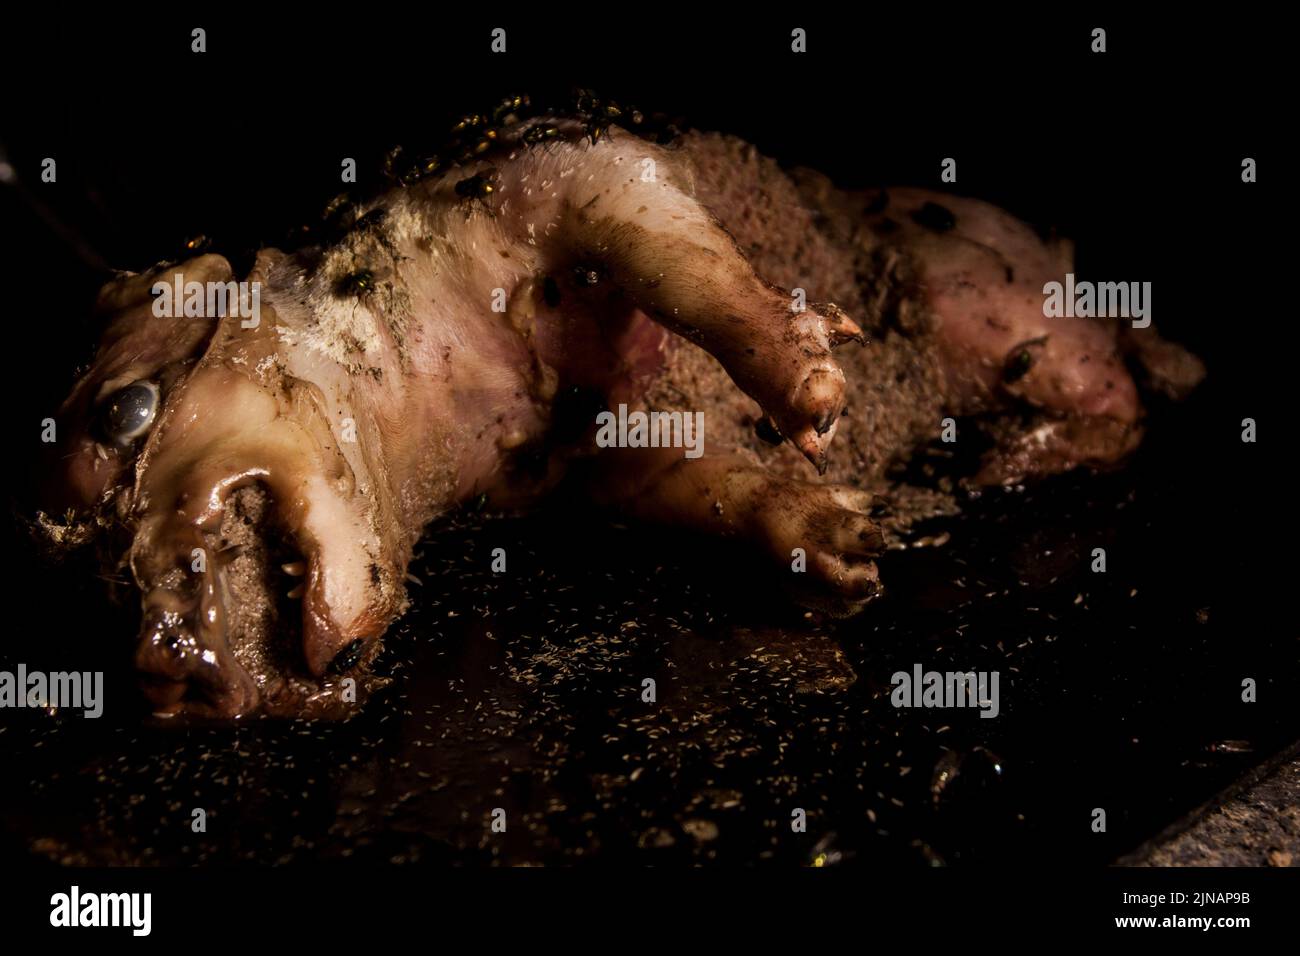 Decomposition stage 3 active decay putrefaction pig corpse Stock Photo